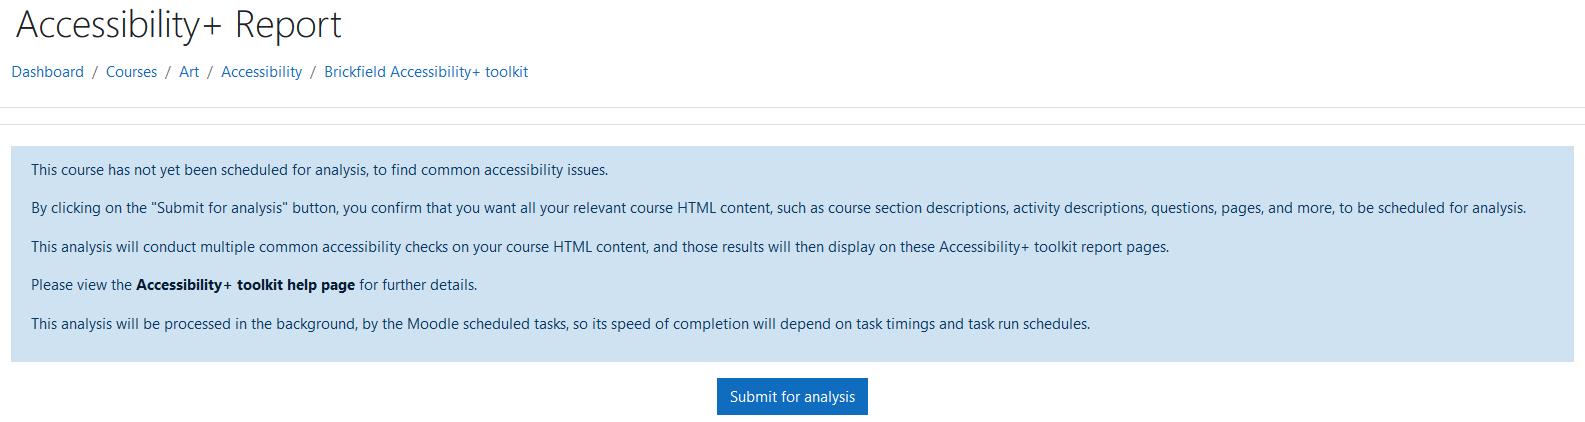 Submitting a course for analysis with the Accessibility+ Toolkit